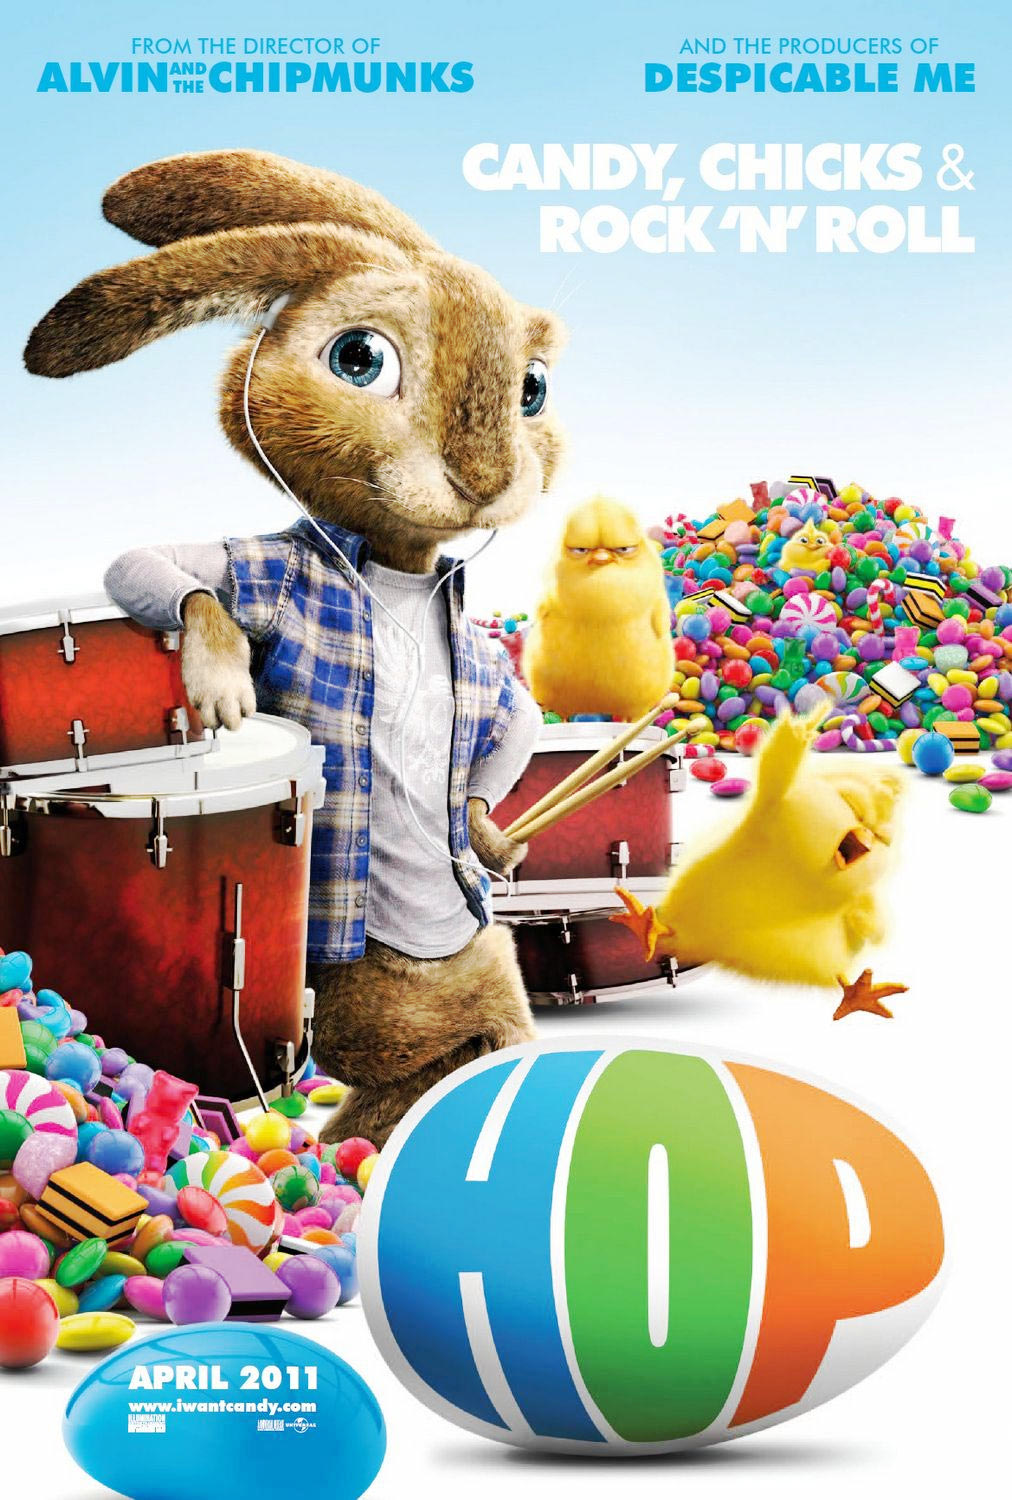 Poster of Universal Pictures' Hop (2011)